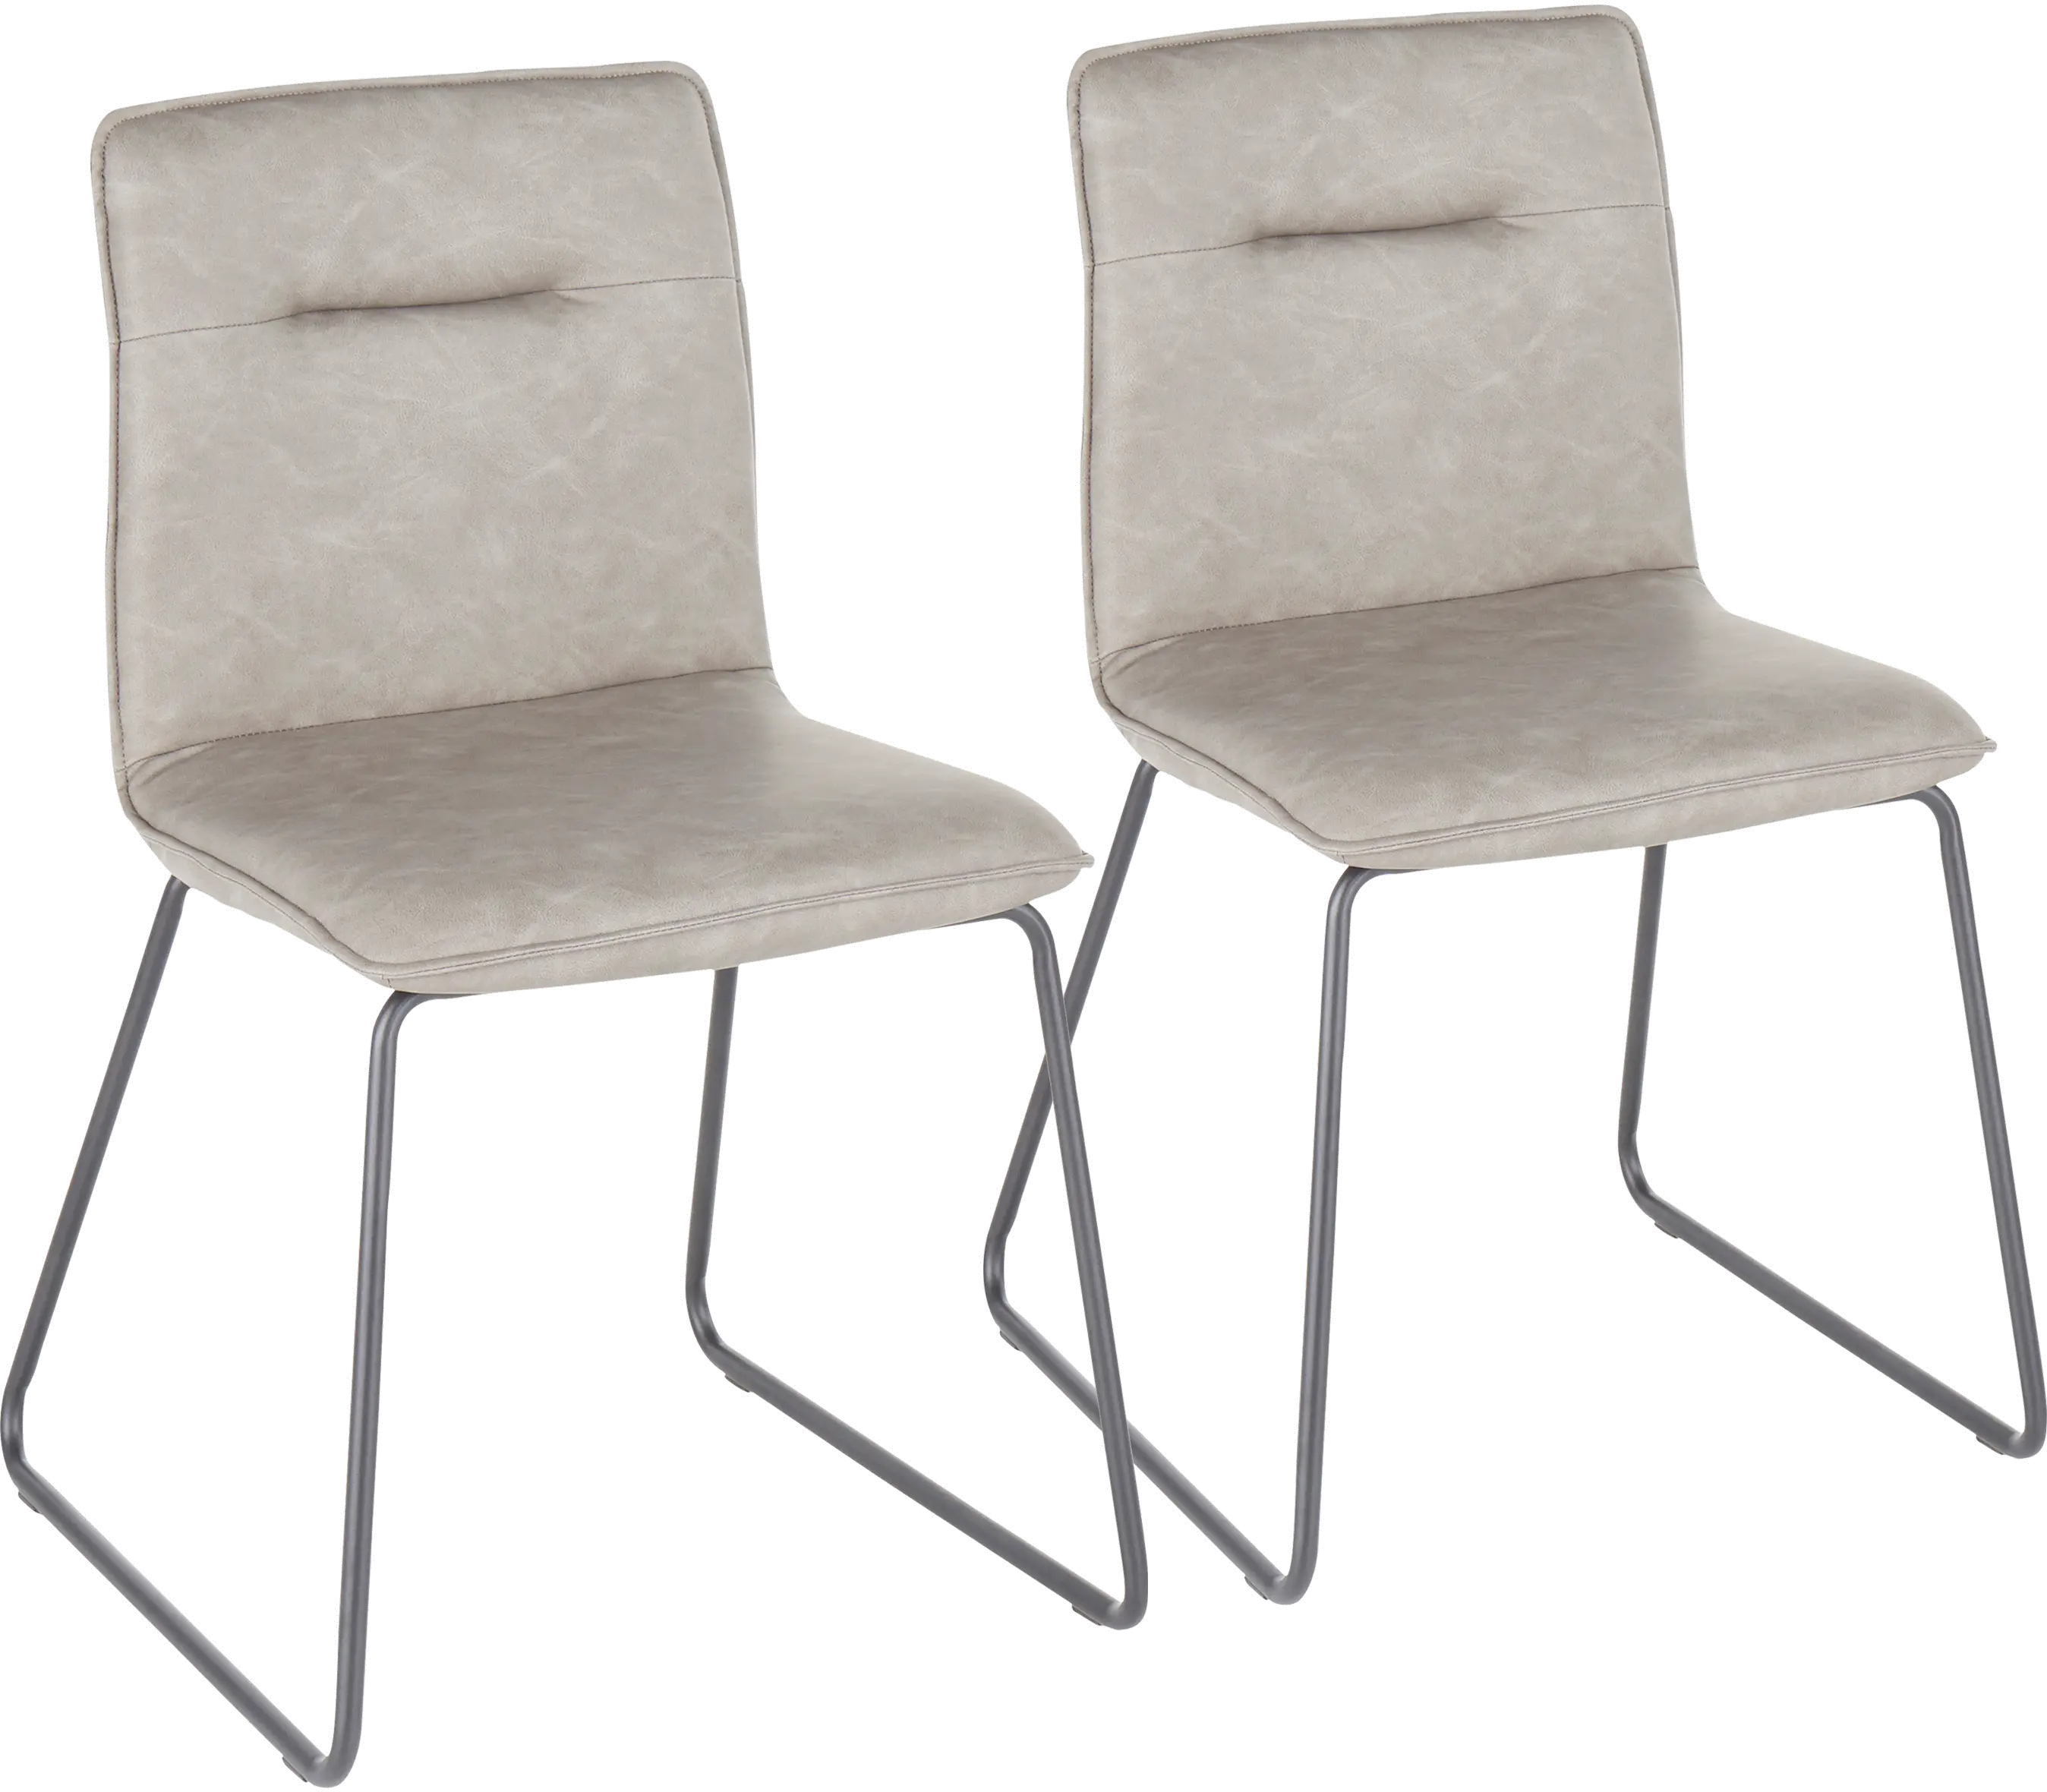 Casper Gray Faux Leather Dining Room Chair (Set of 2)